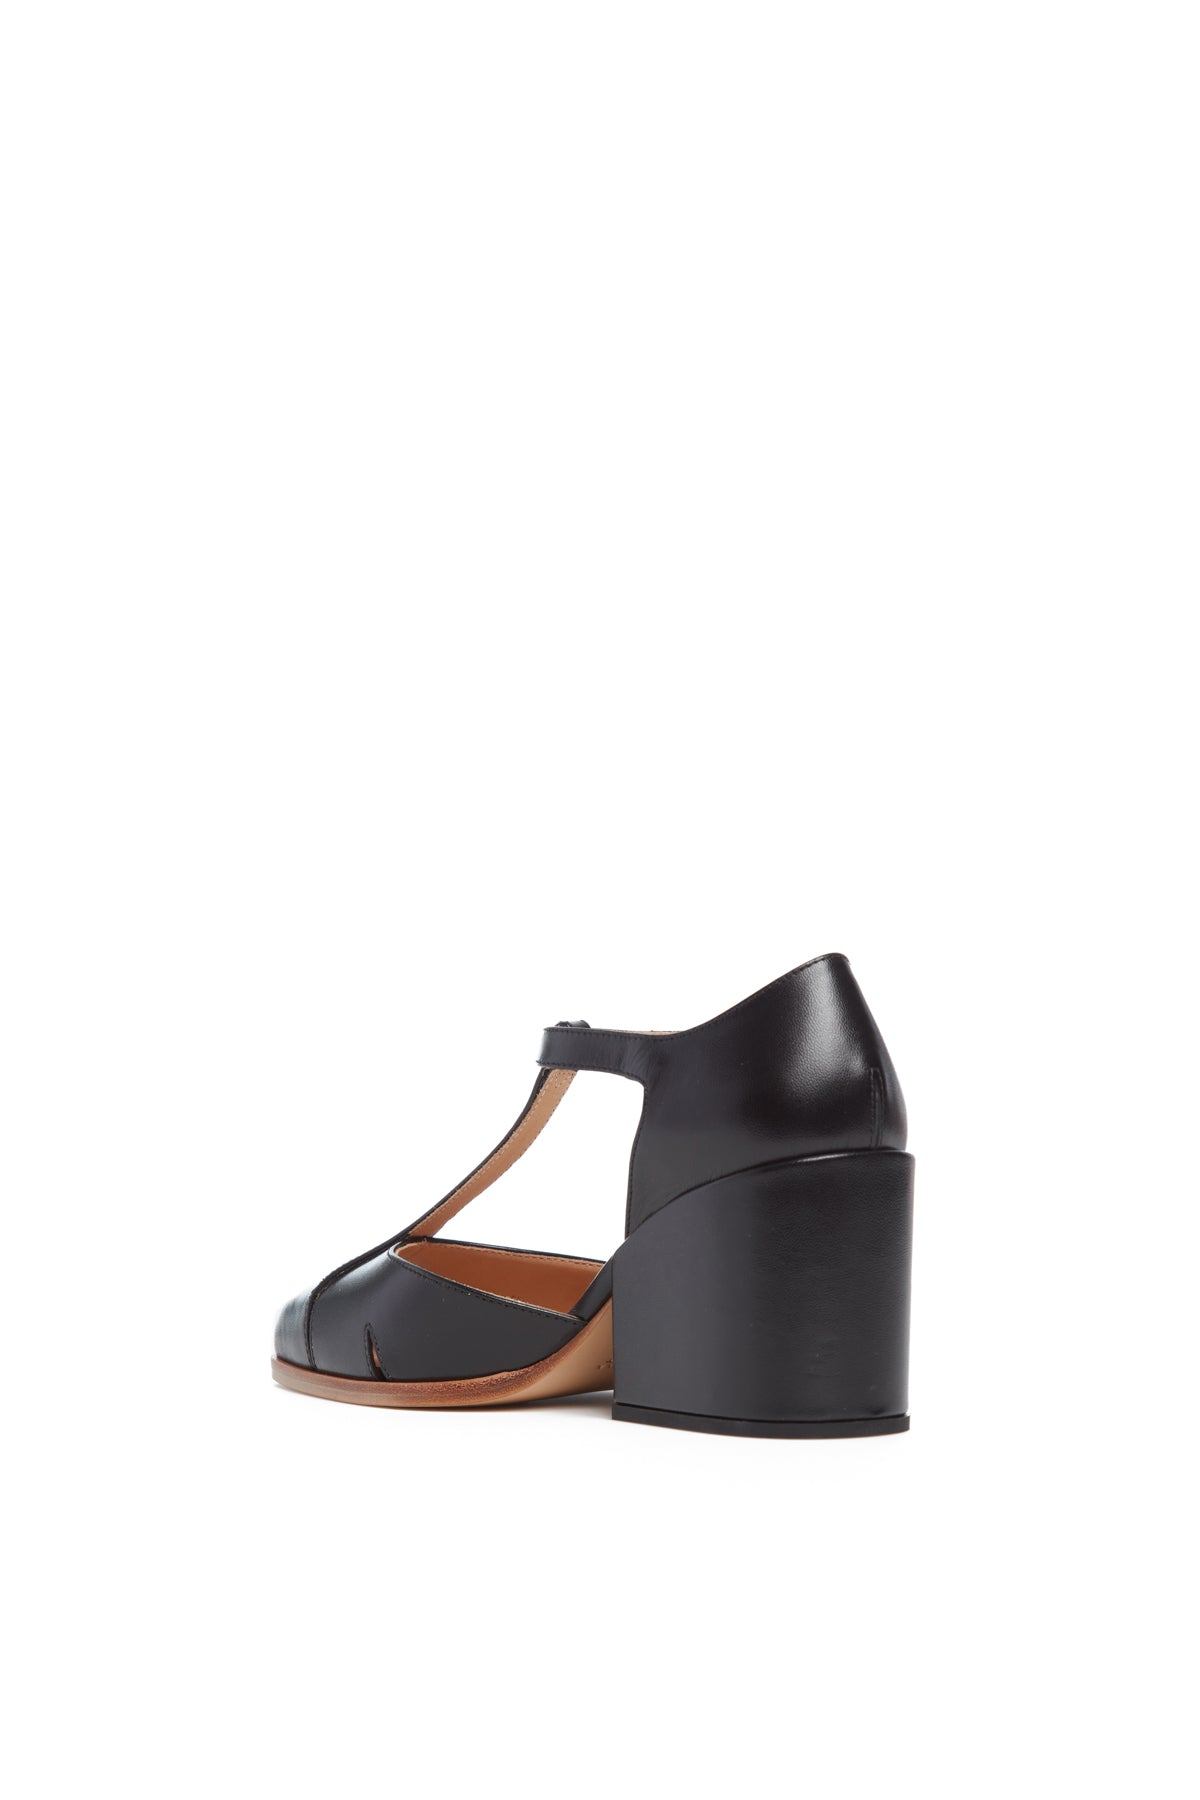 Hawes T-Strap Heel in Black Leather